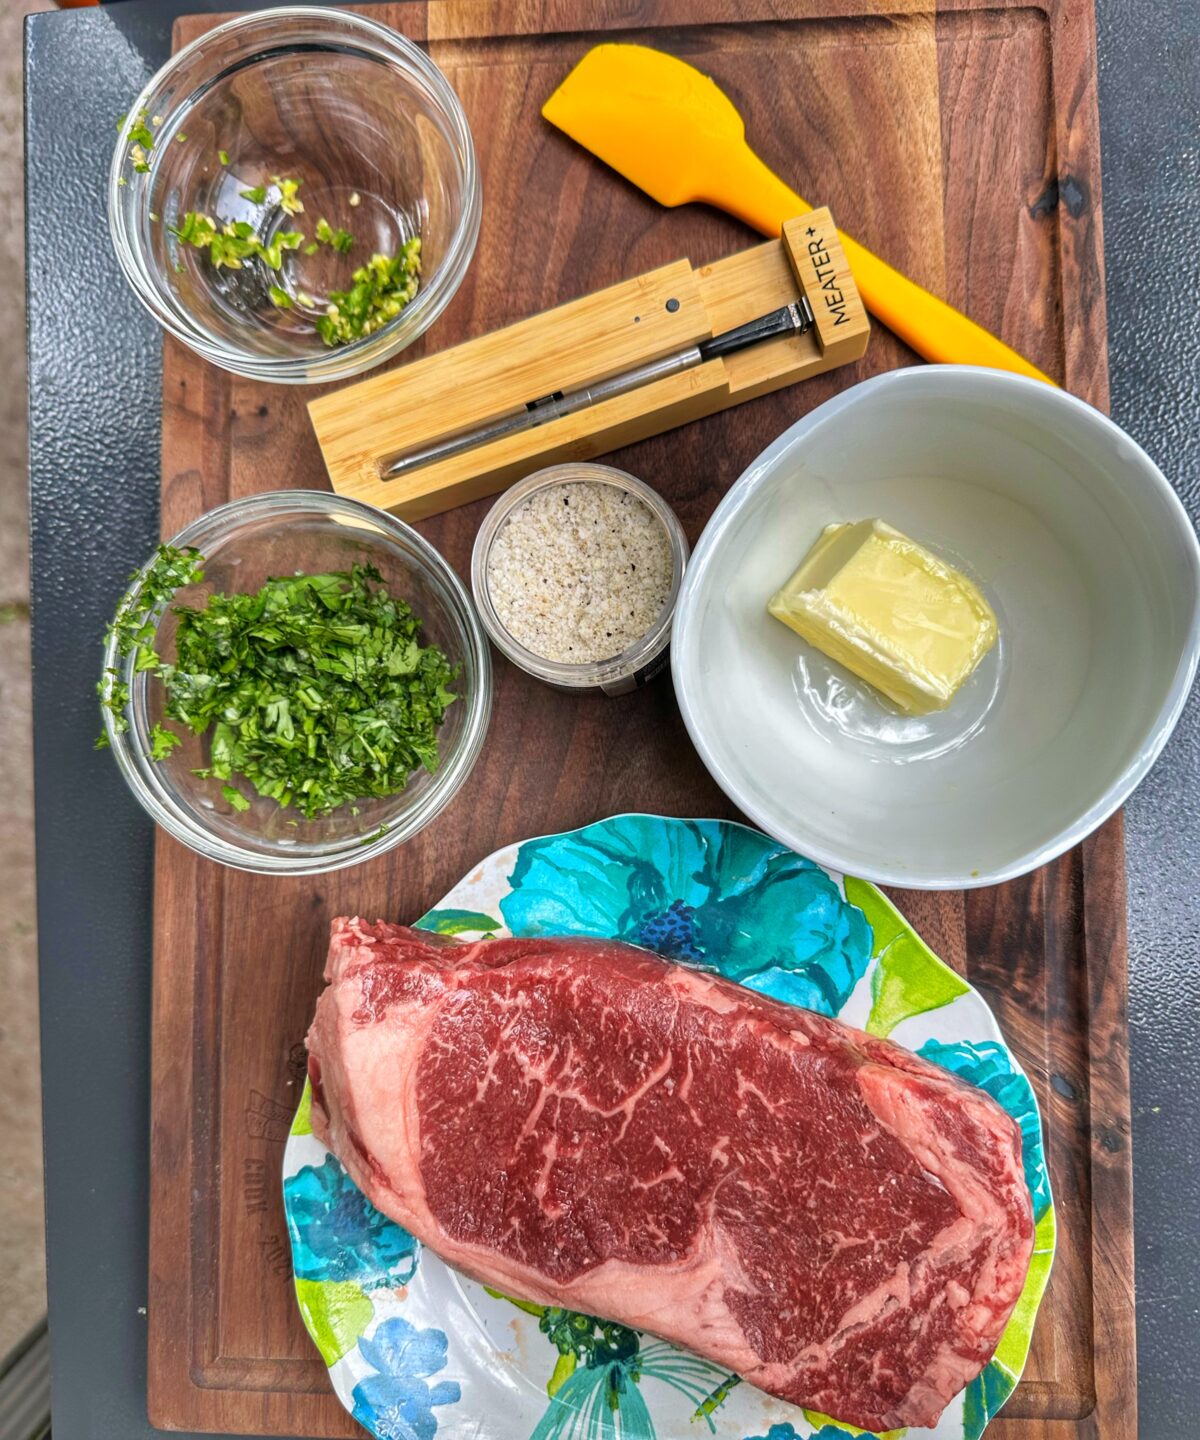 Steak and compound butter ingredients on a cutting board.